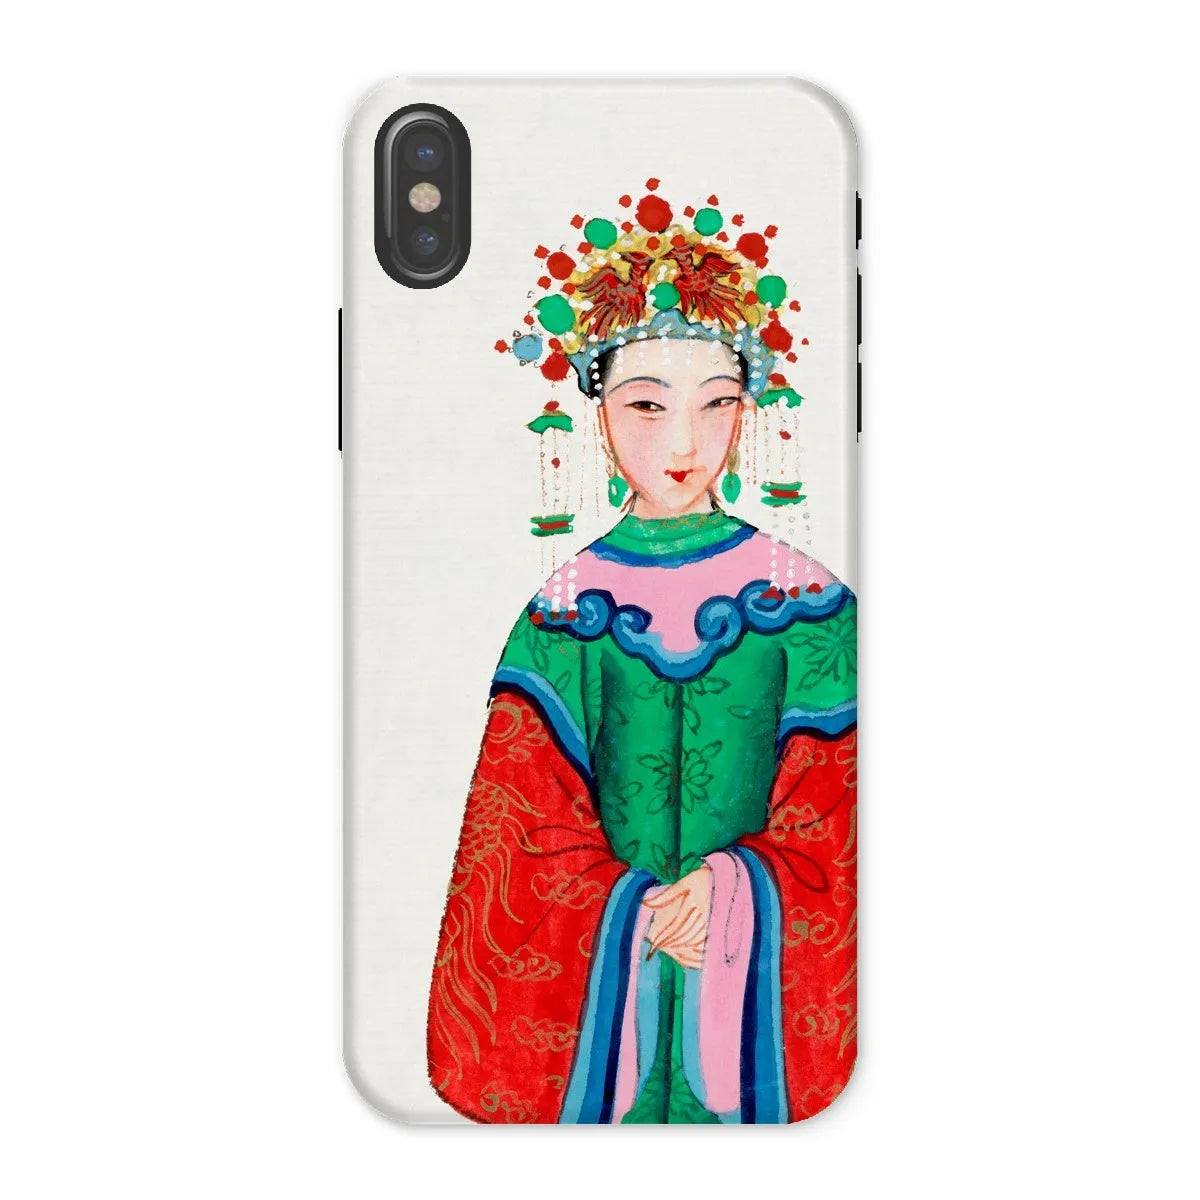 Imperial Princess - Chinese Aesthetic Painting Phone Case - Iphone x / Matte - Mobile Phone Cases - Aesthetic Art